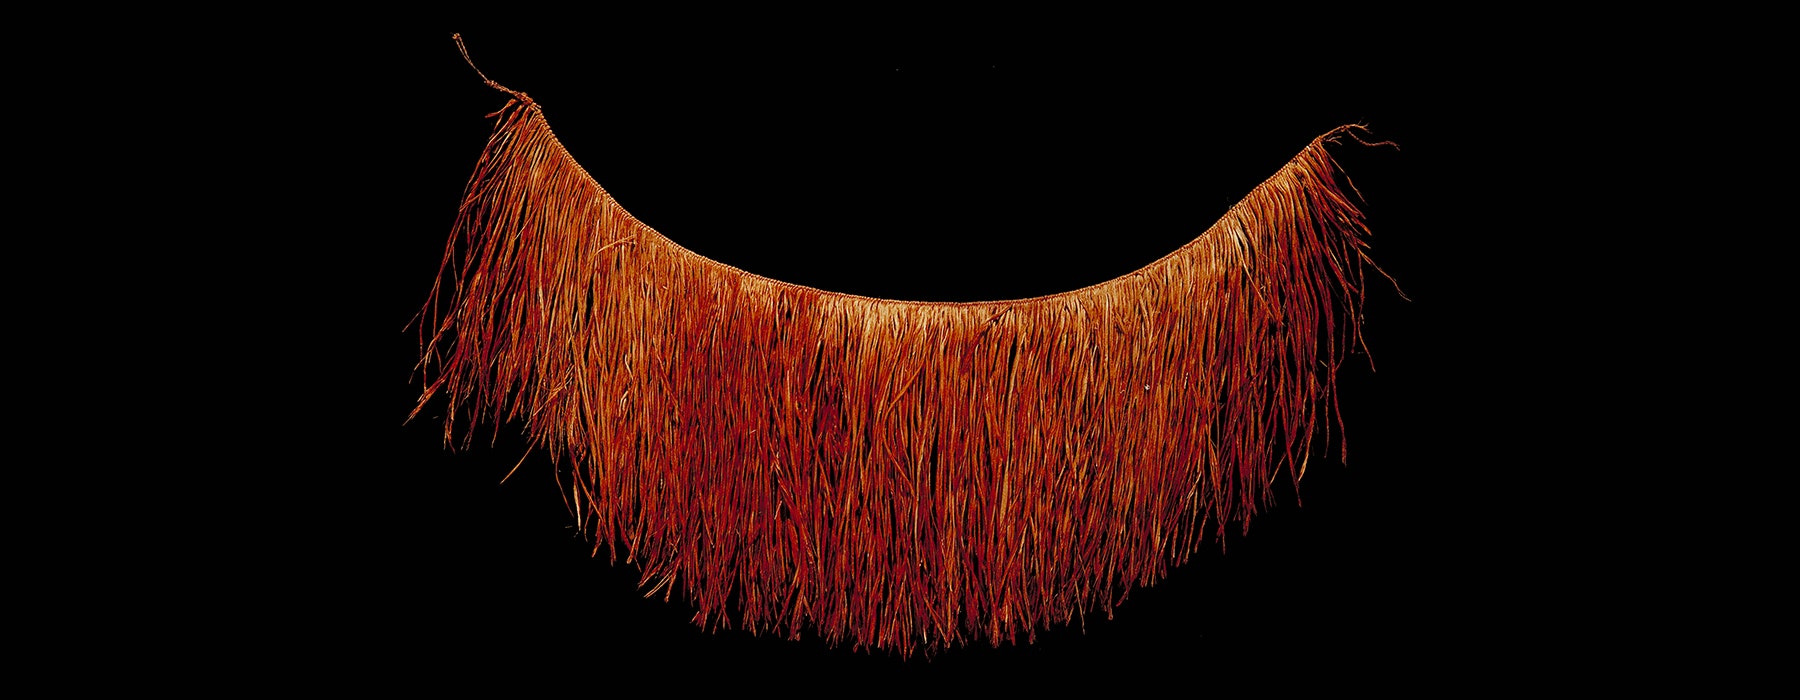 A red skirt made of coconut fibre that has been opened out over a black background.